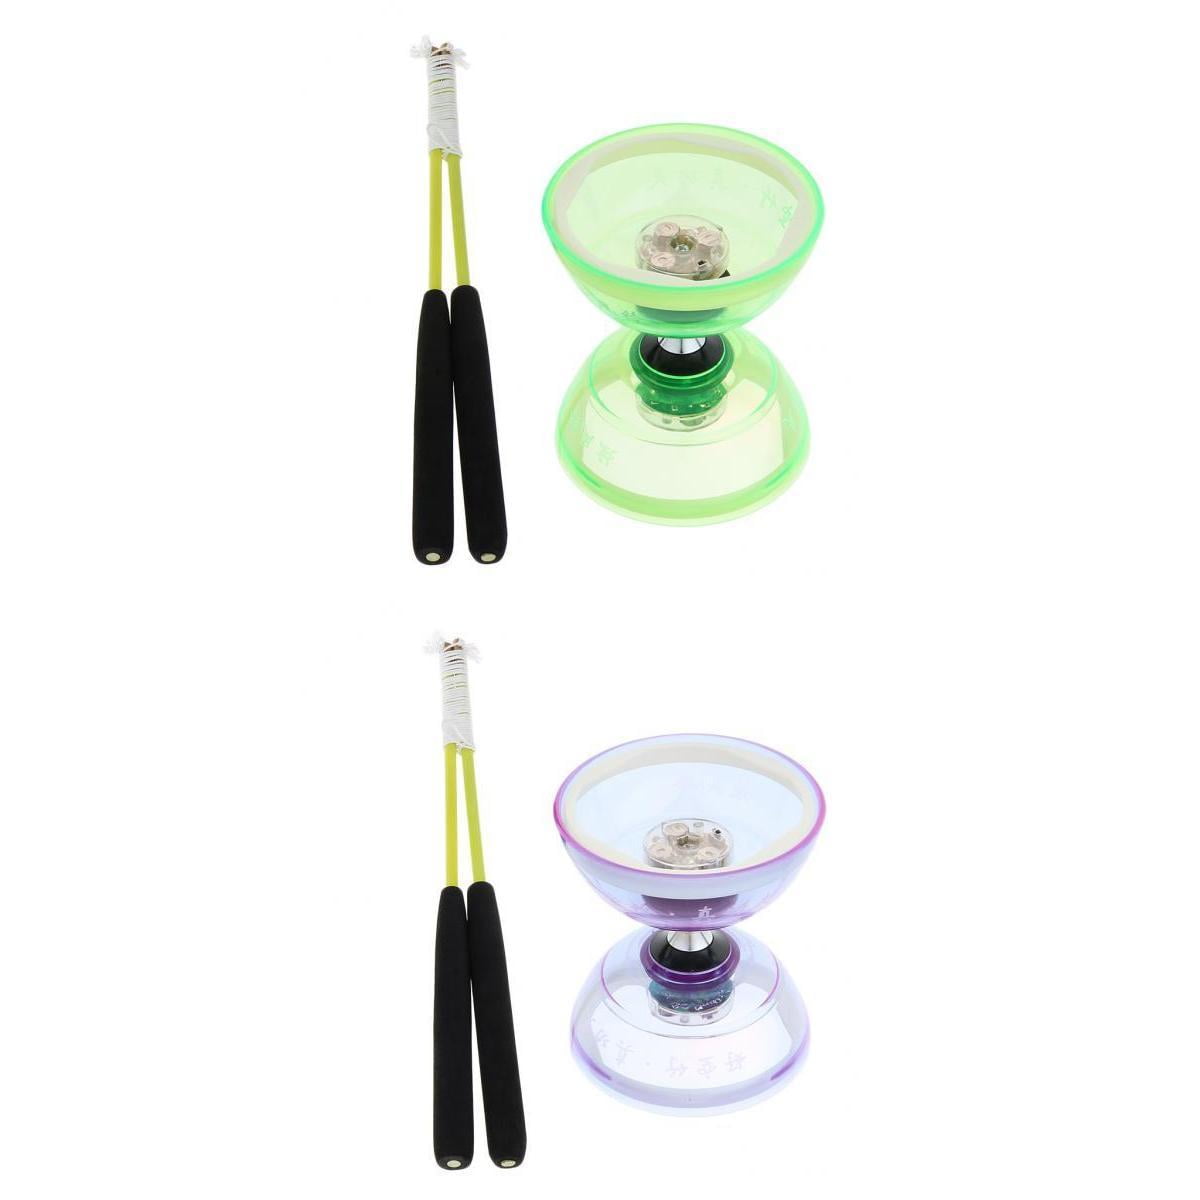 Professional 3 Bearing Diabolo Handsticks & String Juggling Toy with Light 